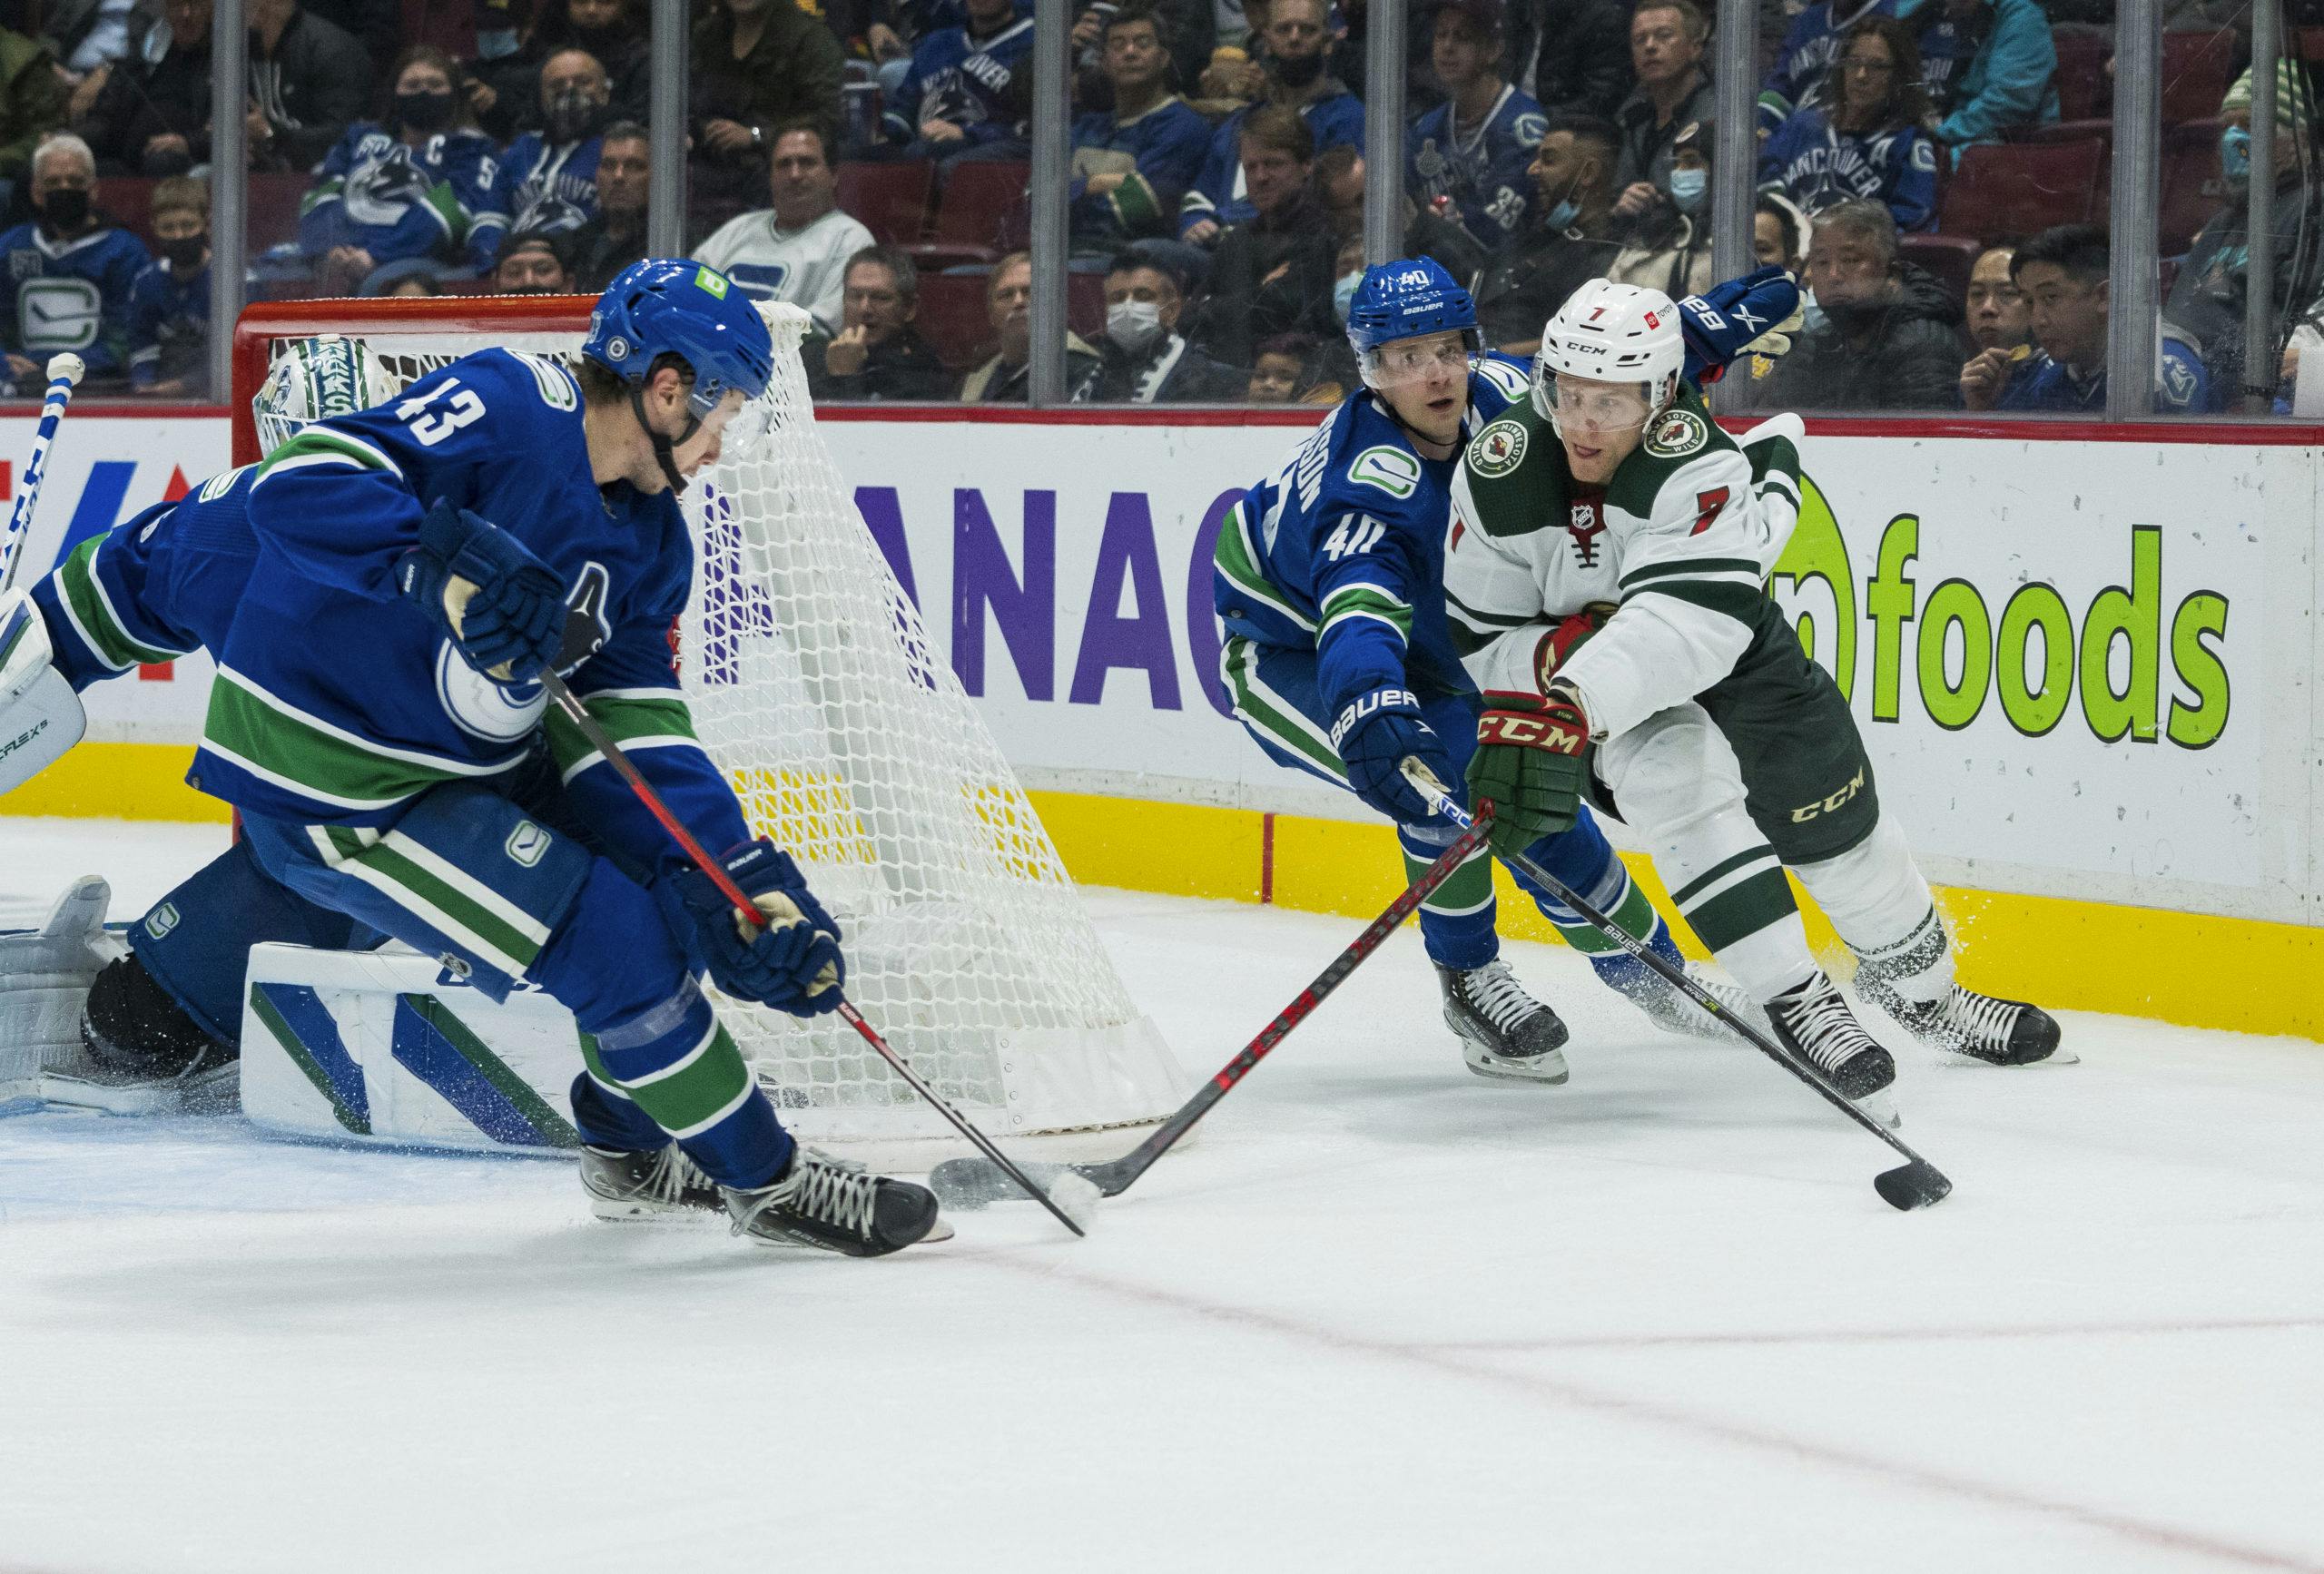 Canucks: 10 thoughts through games 11-22 - Page 2